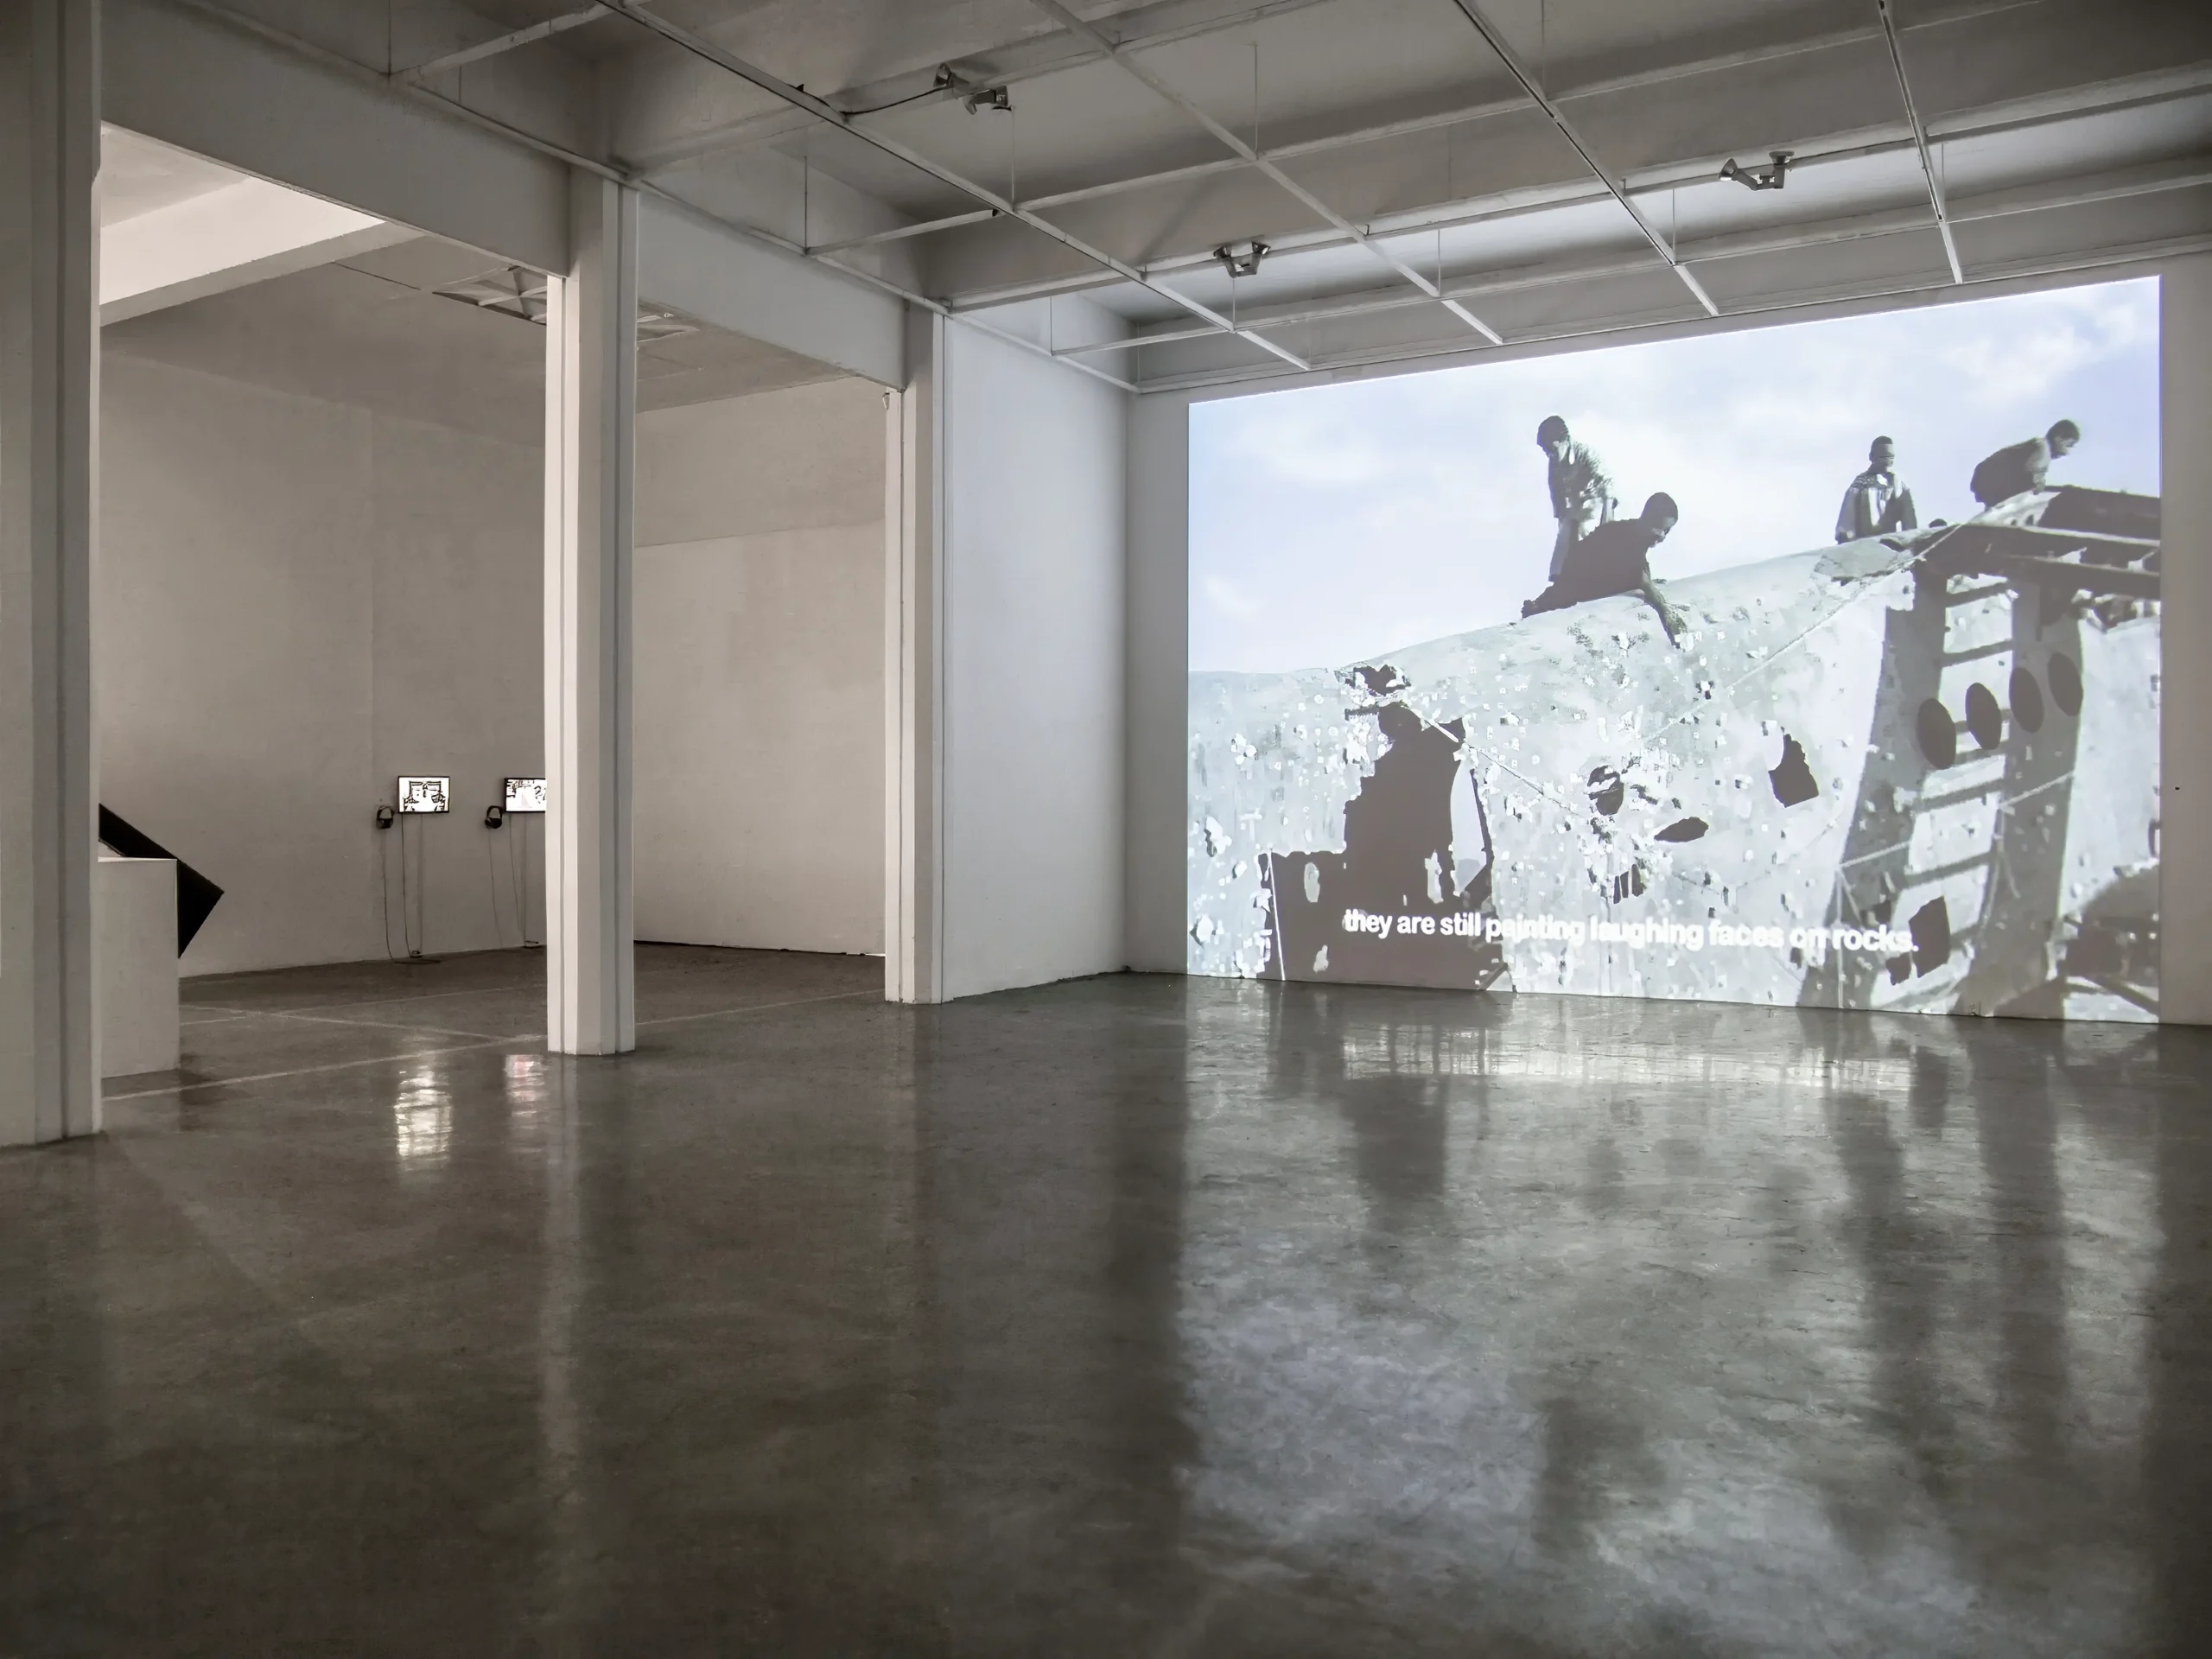 Lida Abdul – In Transit, 2008, installation view, Total Museum of Contemporary Art, Seoul, South Korea, 2014